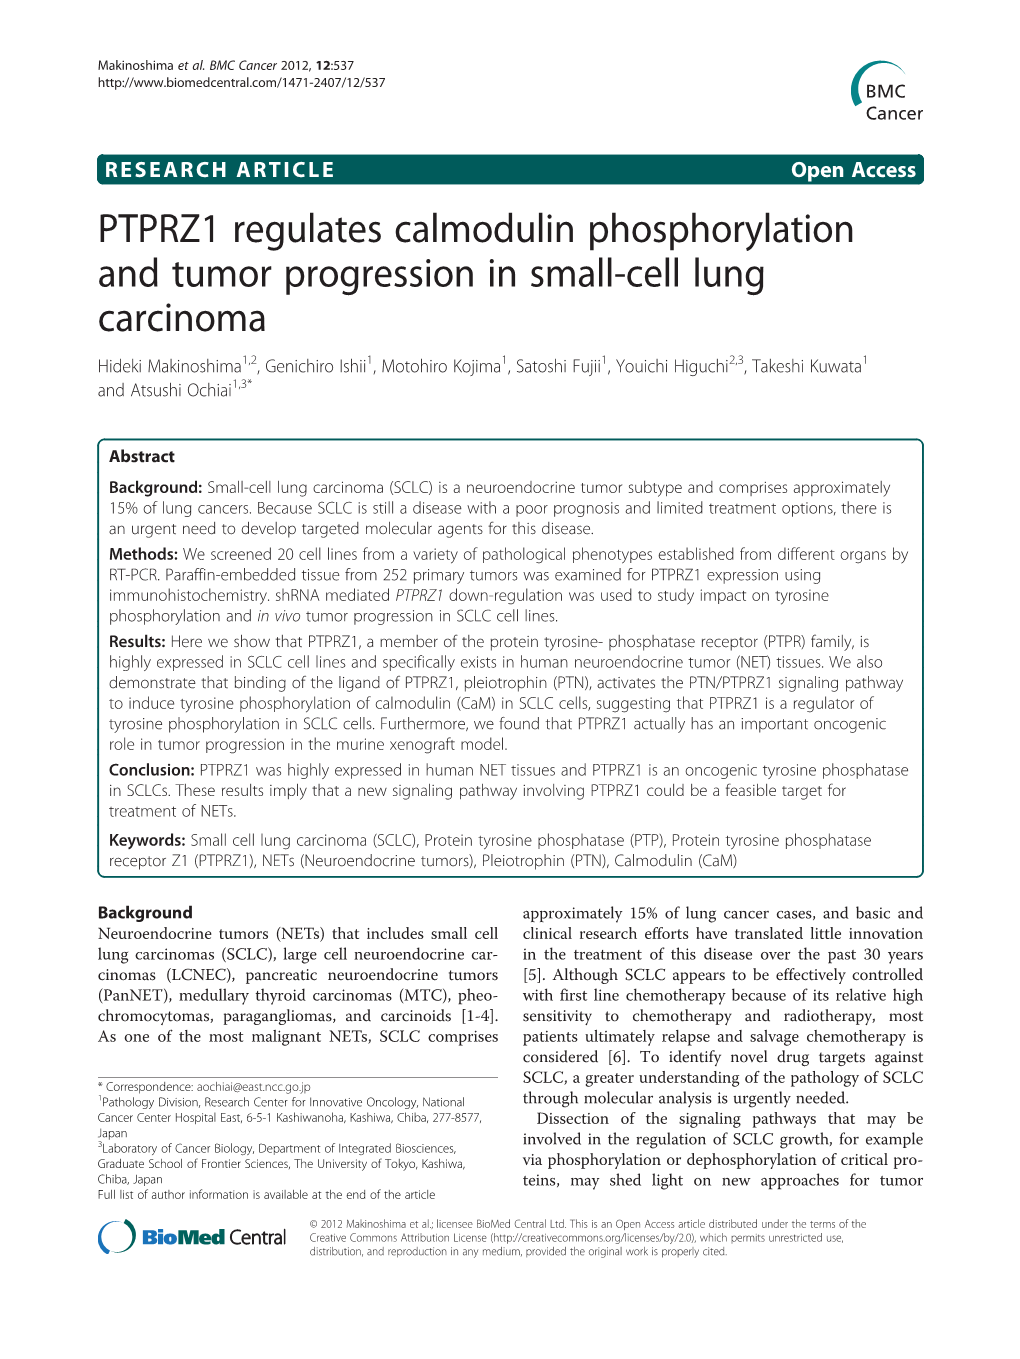 PTPRZ1 Regulates Calmodulin Phosphorylation and Tumor Progression in Small-Cell Lung Carcinoma